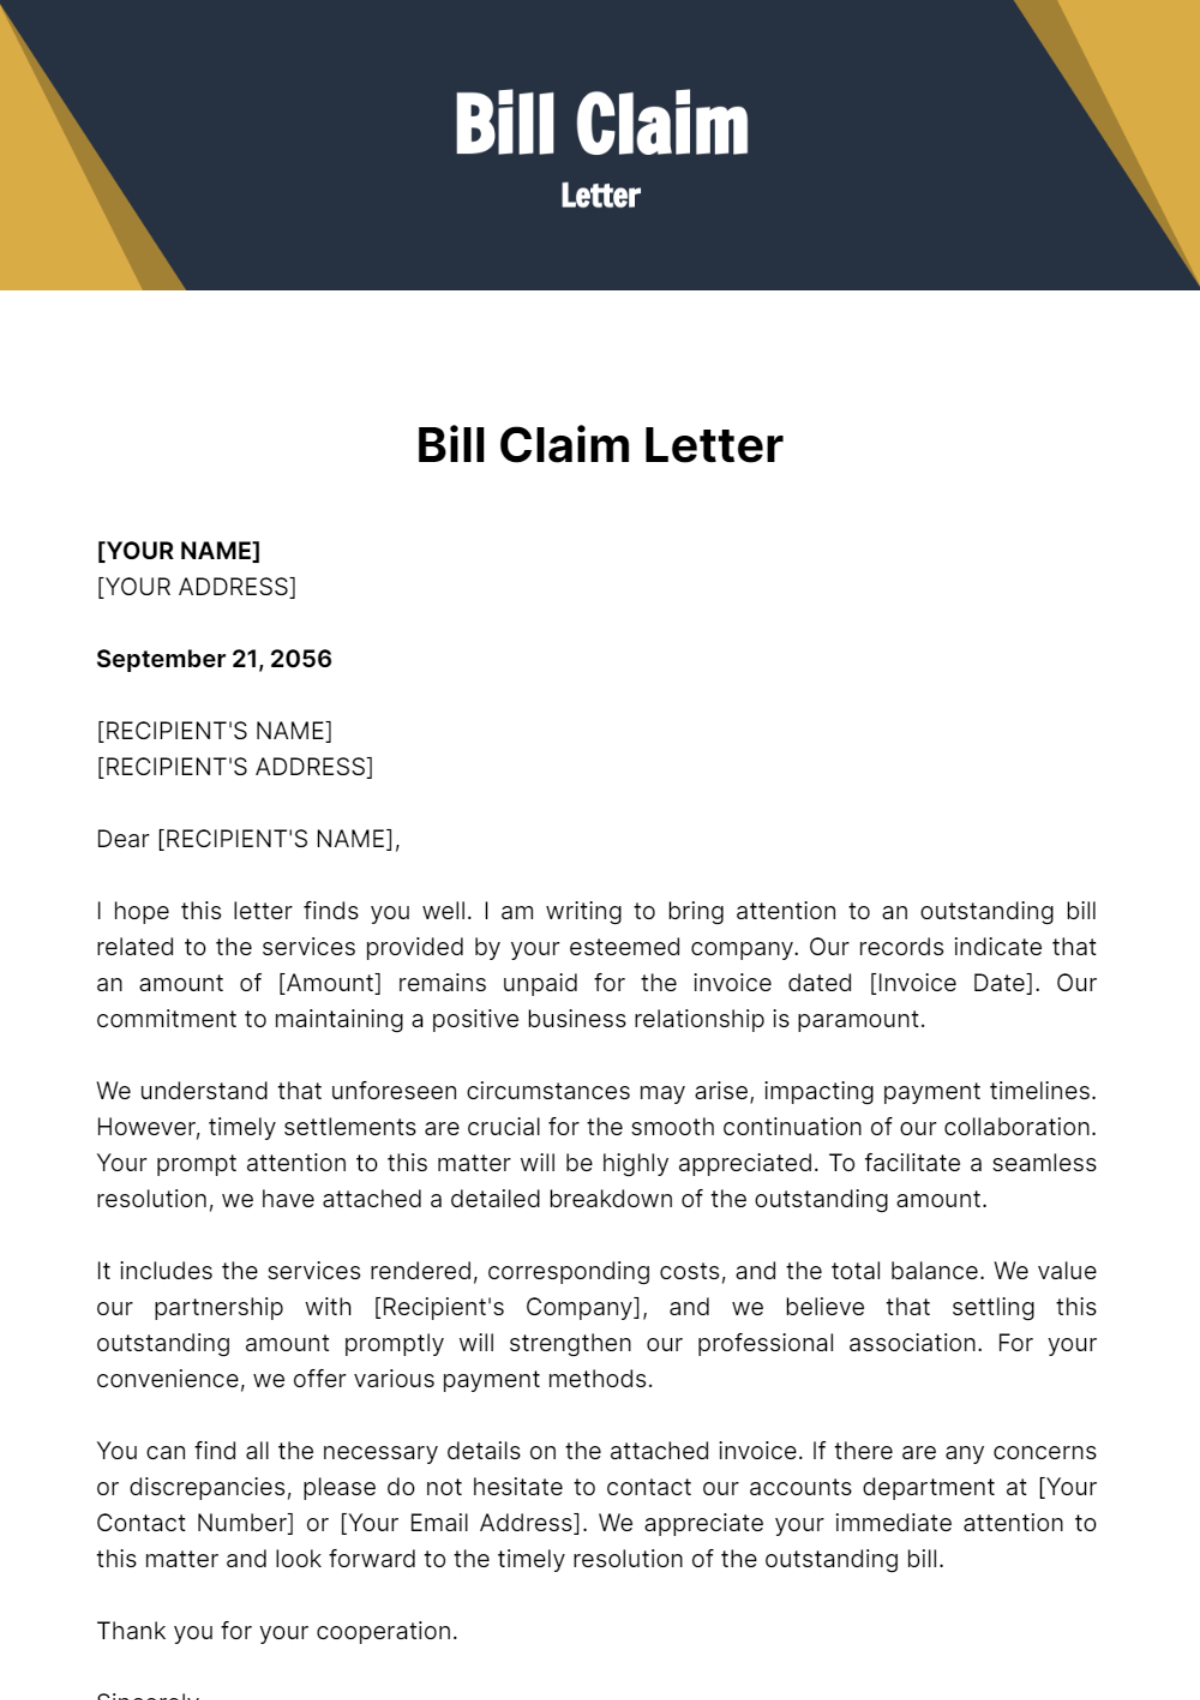 Bill Claim Letter Template